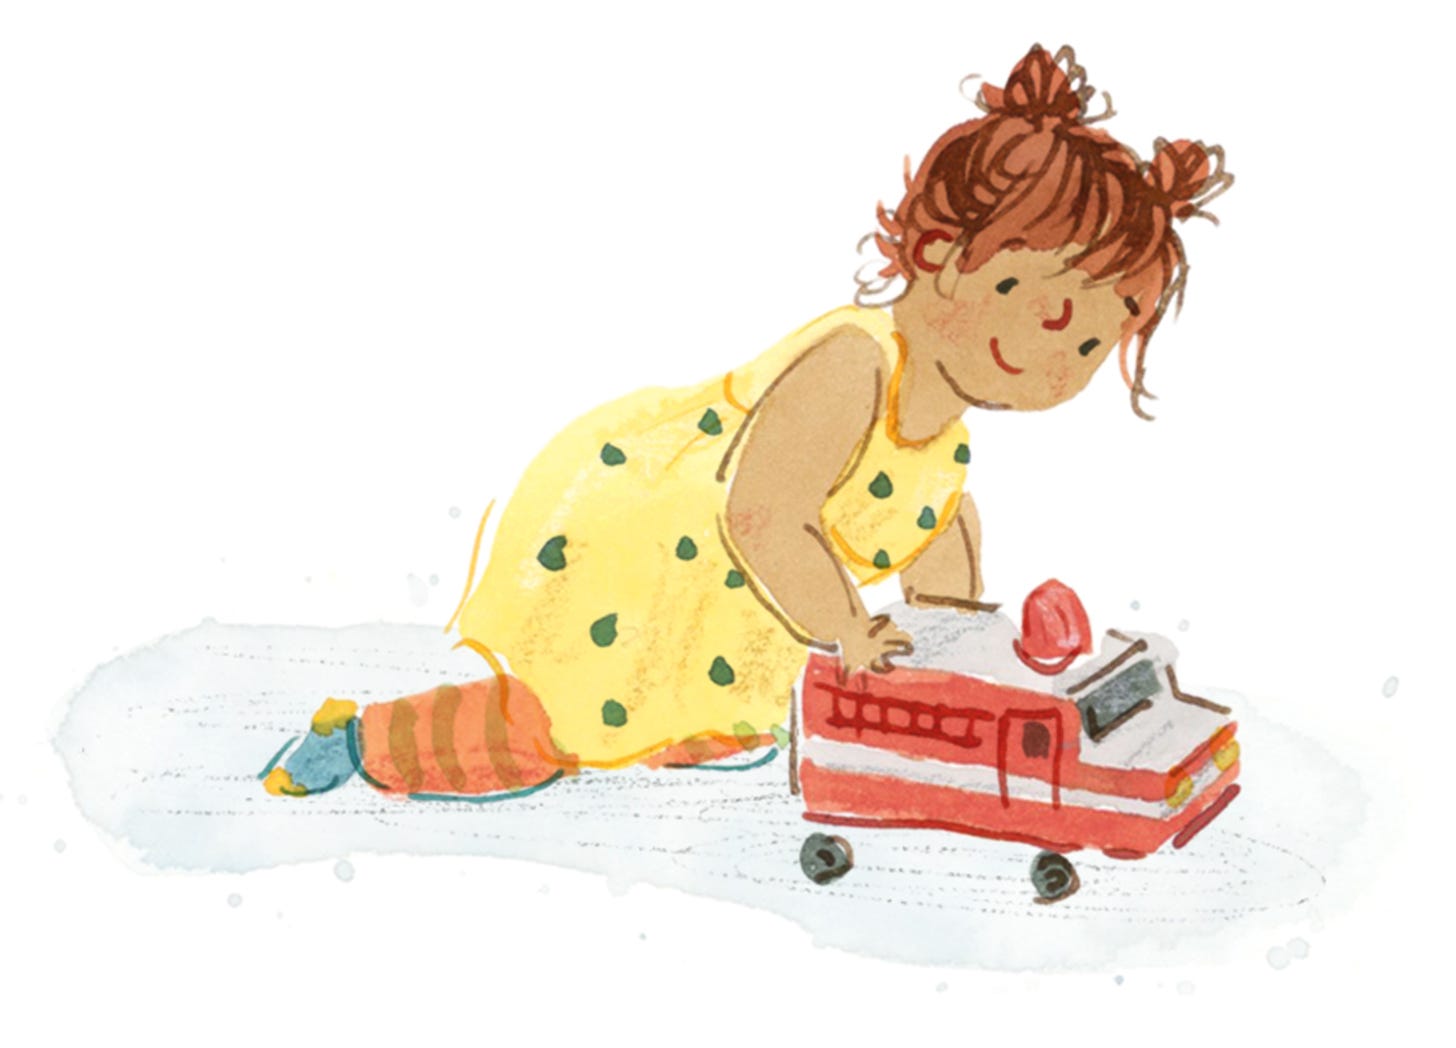 watercolour and ink illustration by Nanette Regan of a 3 year old girl playing with a toy fire engine